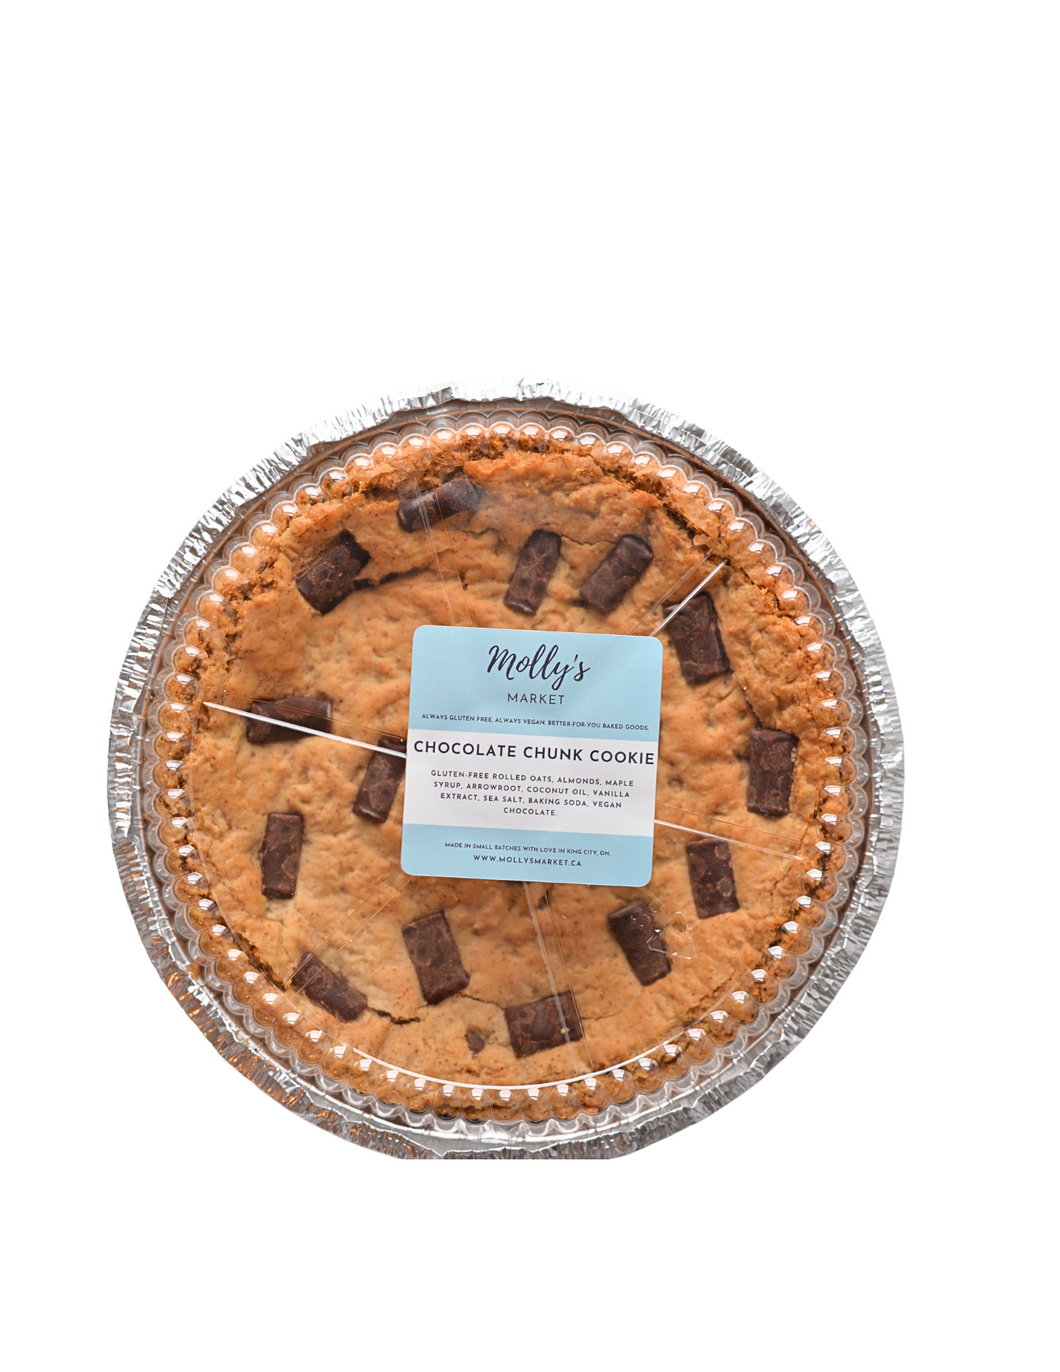 Molly's Chocolate Chunk Cookie Pie